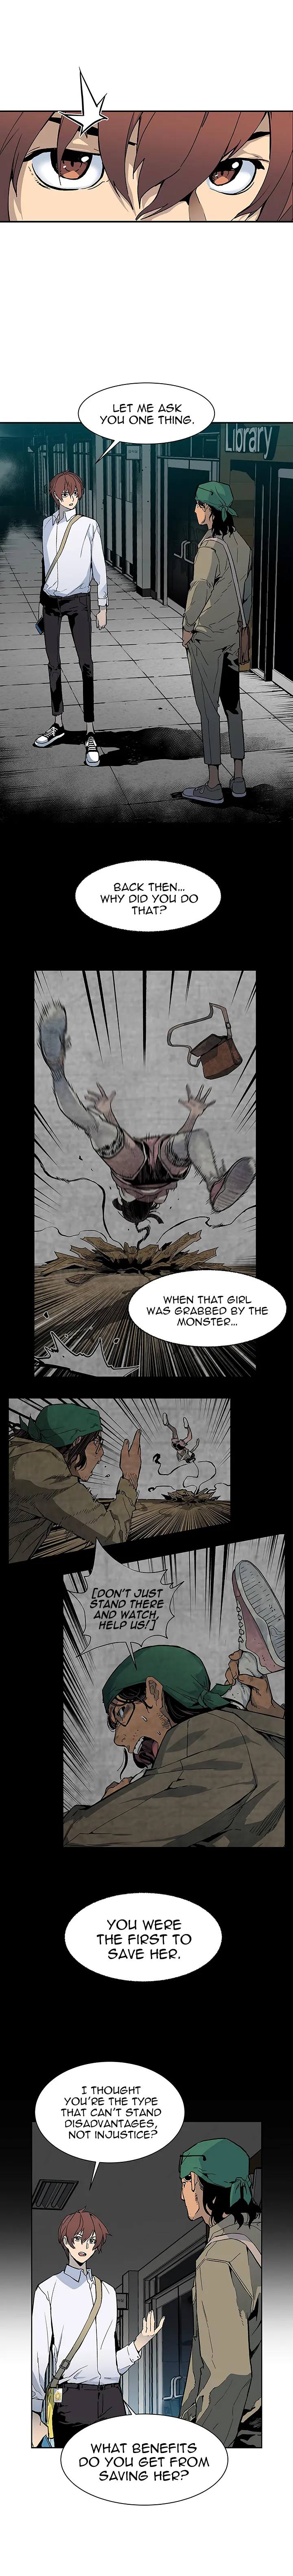 The Second Coming of Gluttony - Chapter 12 Page 12